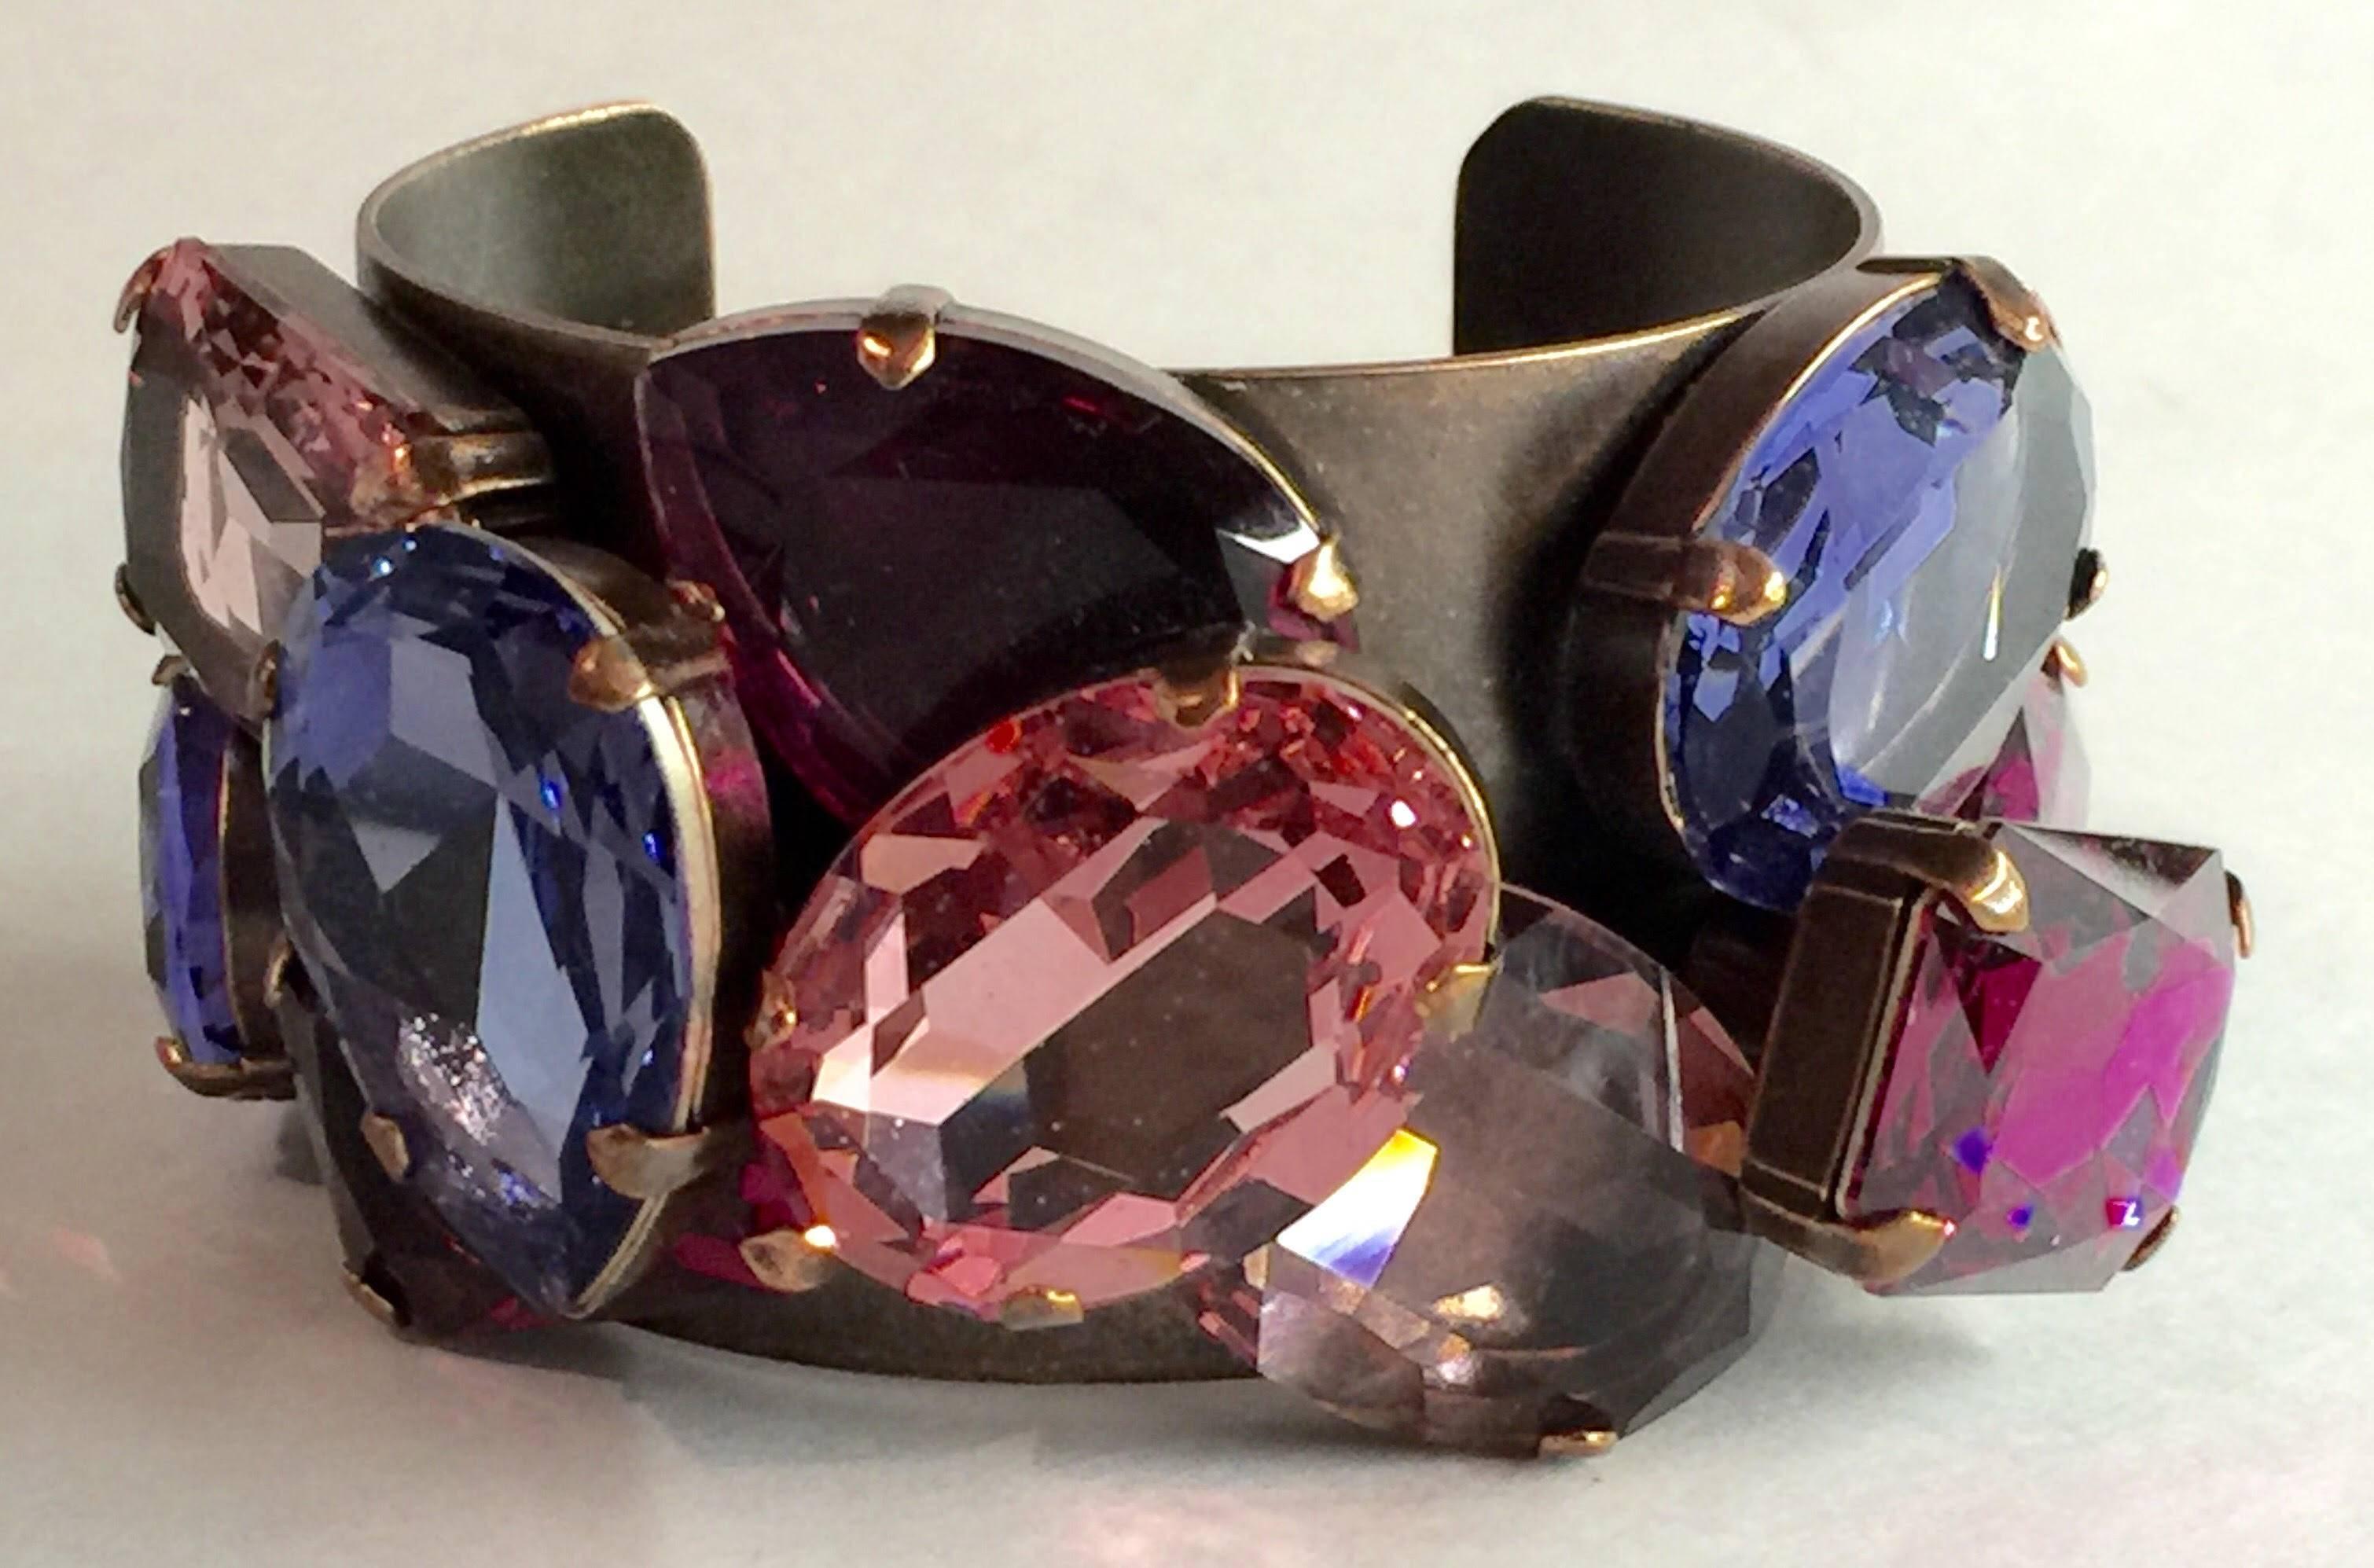 Dramatic and impactful indeed is this amazing LANVIN Brozed Copper Cuff Bracelet with Huge Rhinestone Detail. Shades of Pinki, Purple and Ice Blue are combined to great effect with huge sizes and prong setting work, this cuff is signed LANVIN with